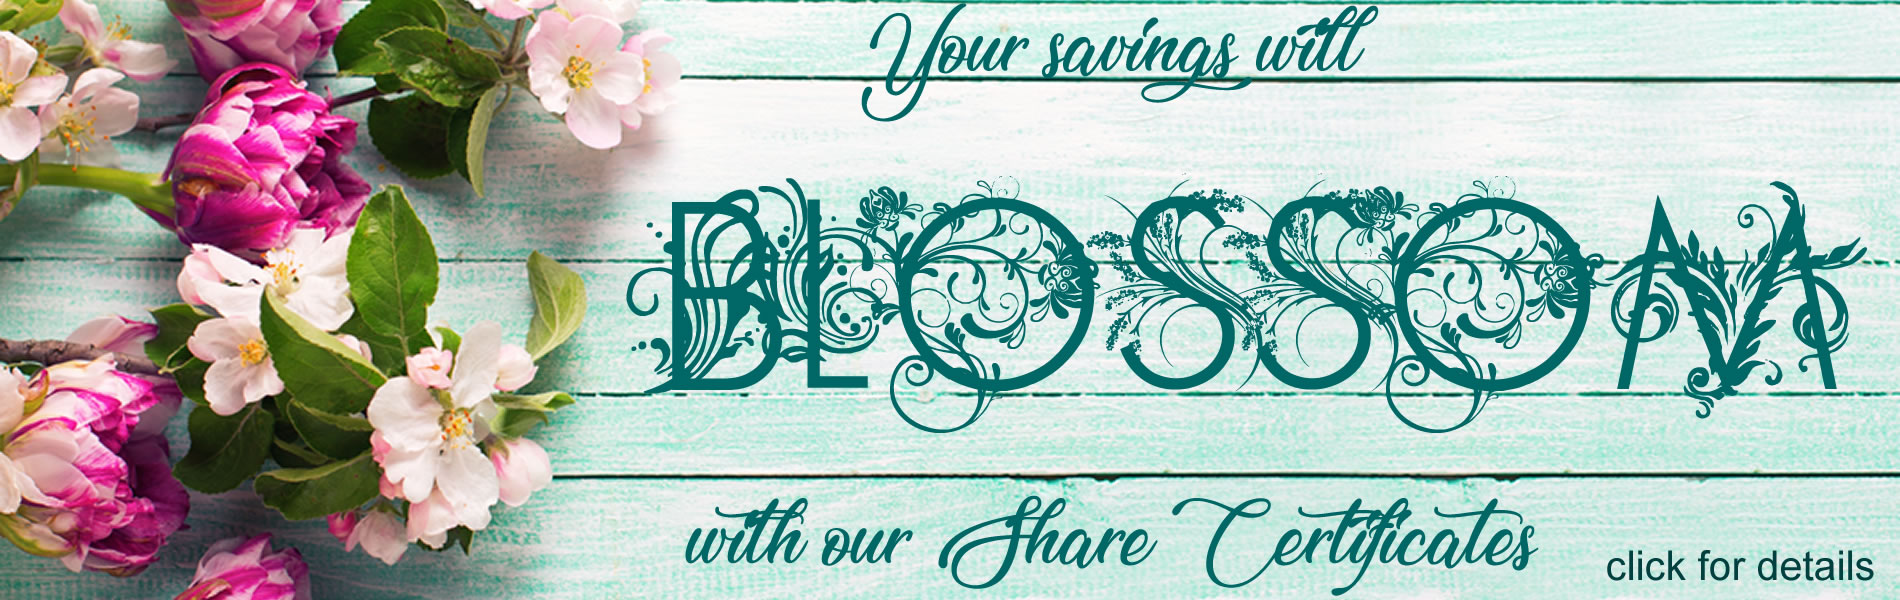 Your savings will blossom with our Share Certificates.  Click for details